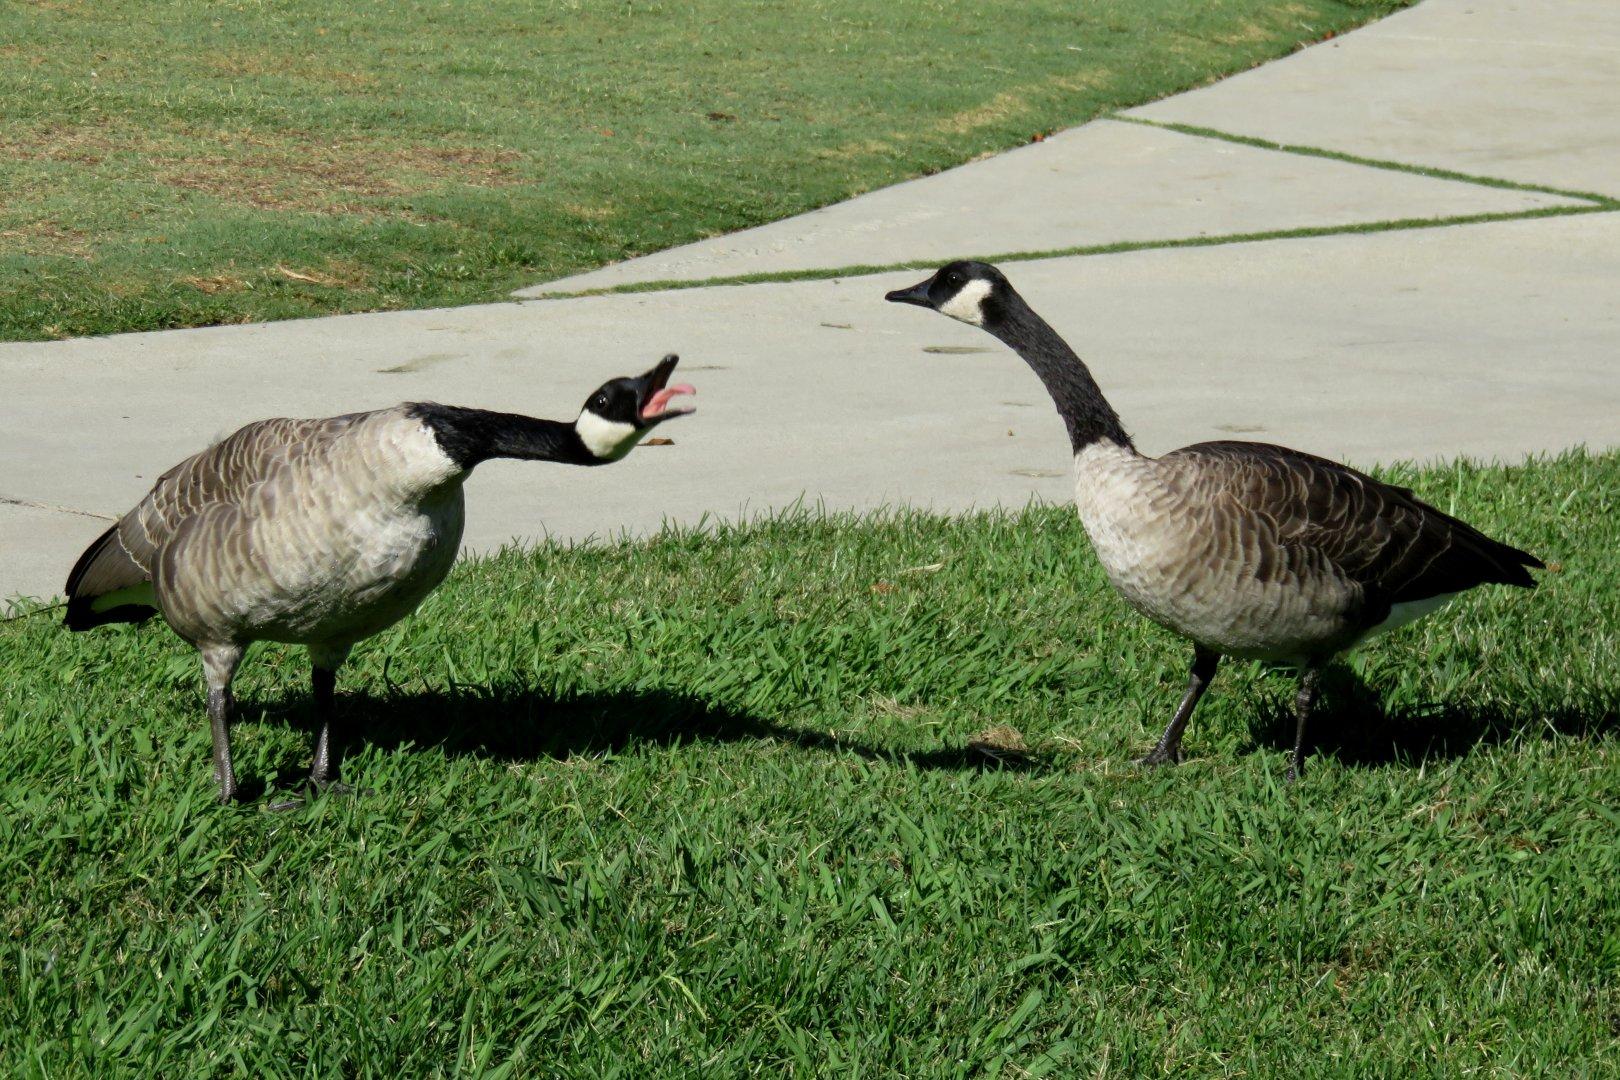 Two geese, one shouting at the other.